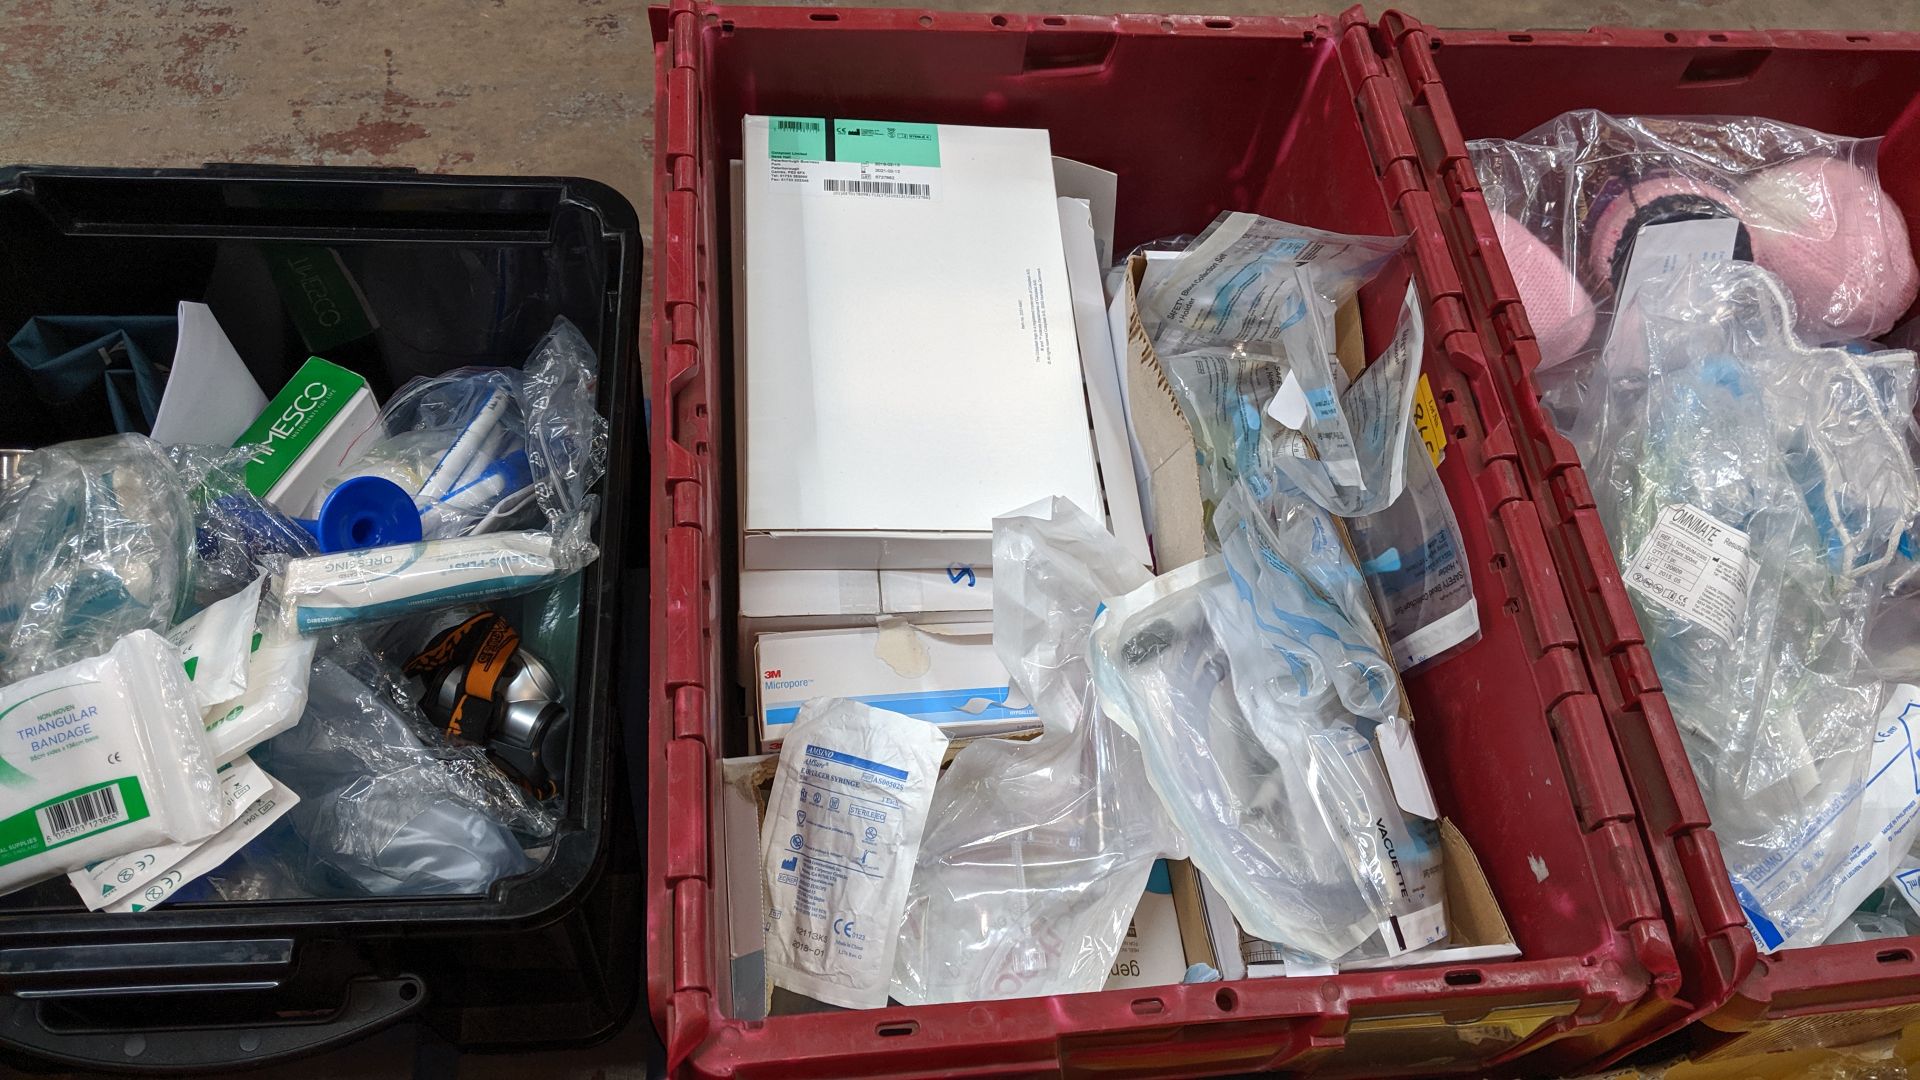 Contents of a pallet of assorted medical supplies including single use resuscitators, beakers, - Image 6 of 7